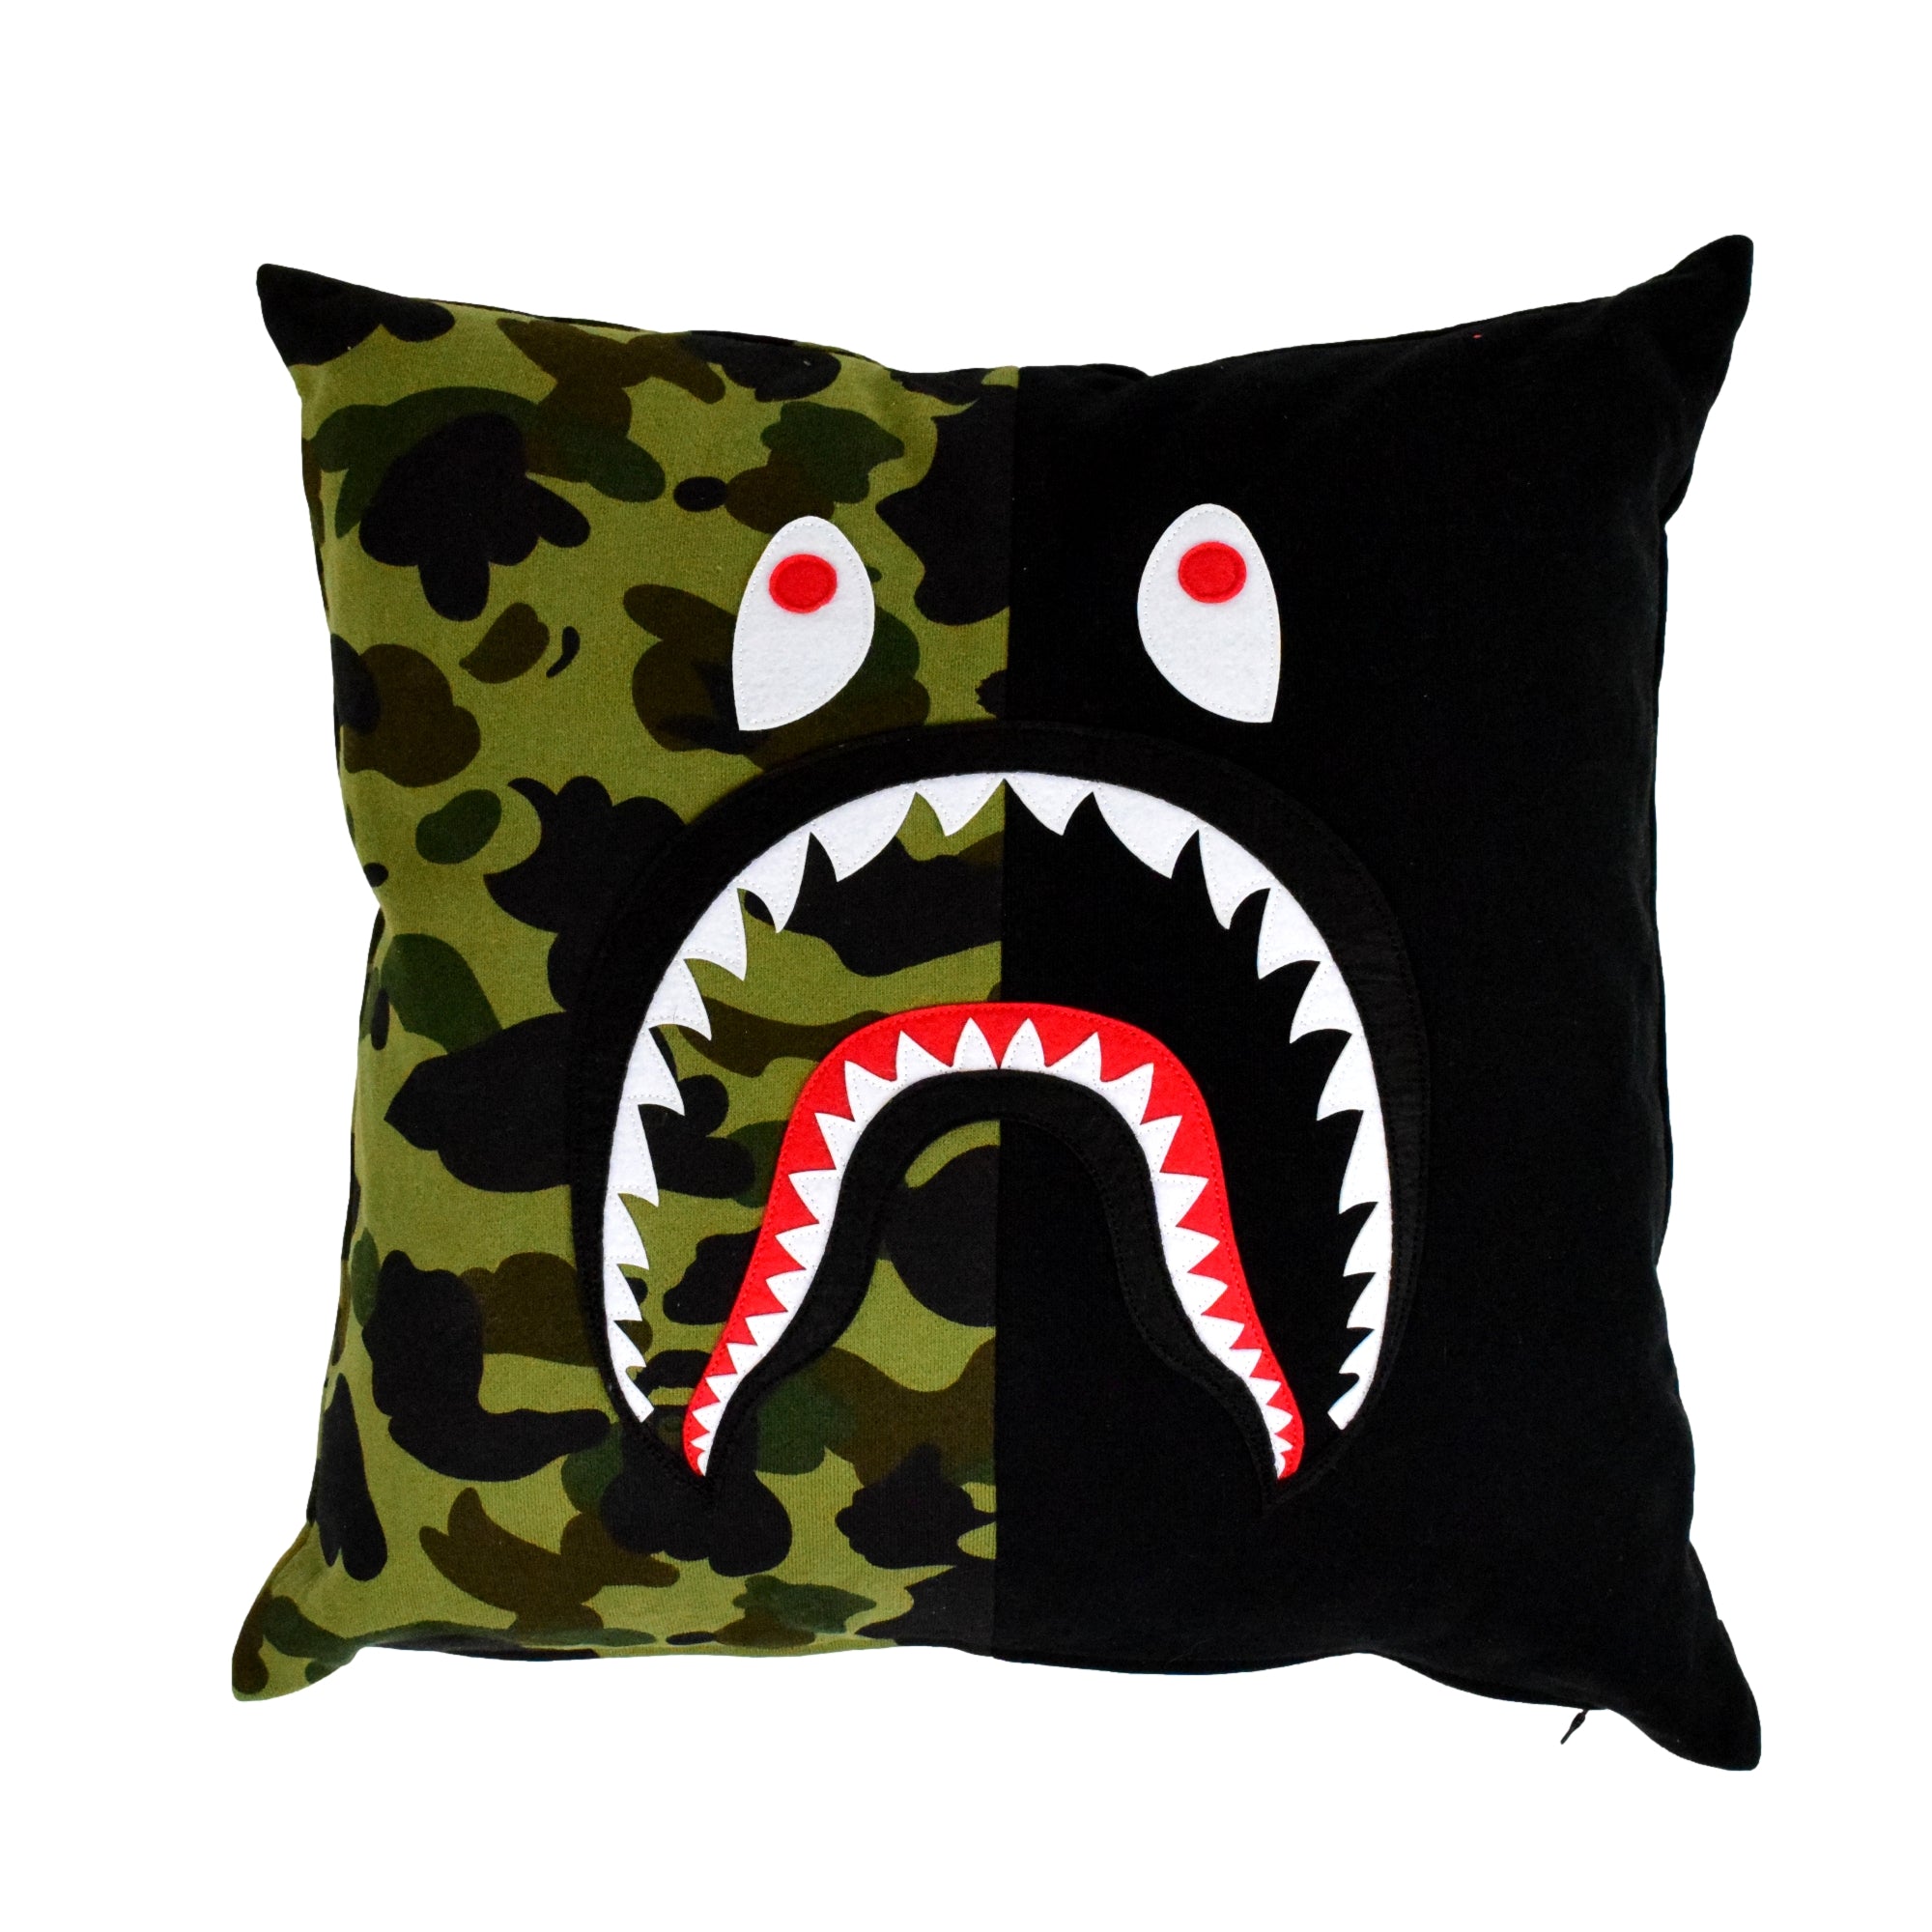 Bape, Ape, Aape, Shark, Hypebeast, Army, Swag, Supreme, Shark, Sharks,  Camo, Hypebeast #3 Throw Pillow by Cicit Witwit - Pixels